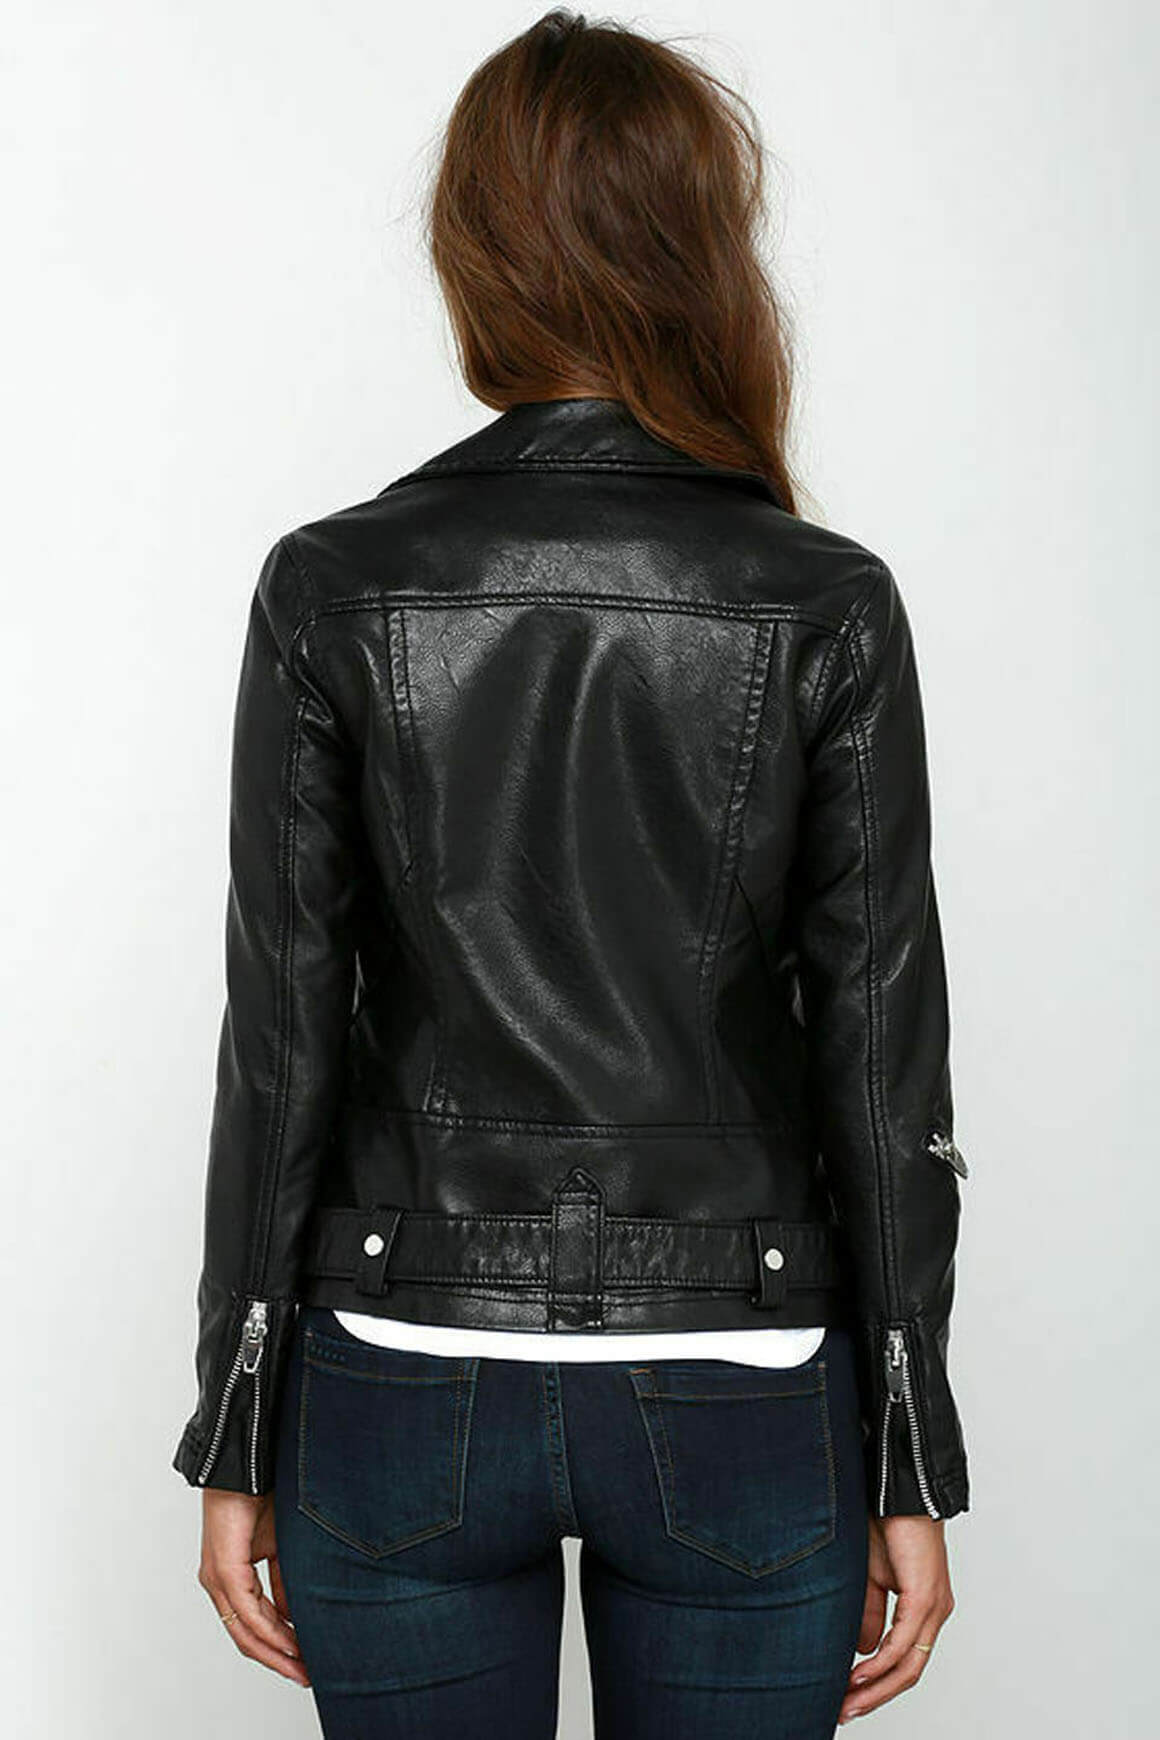 New Womens Motorcycle Genuine Sheep Leather Party Jacket LFW233 